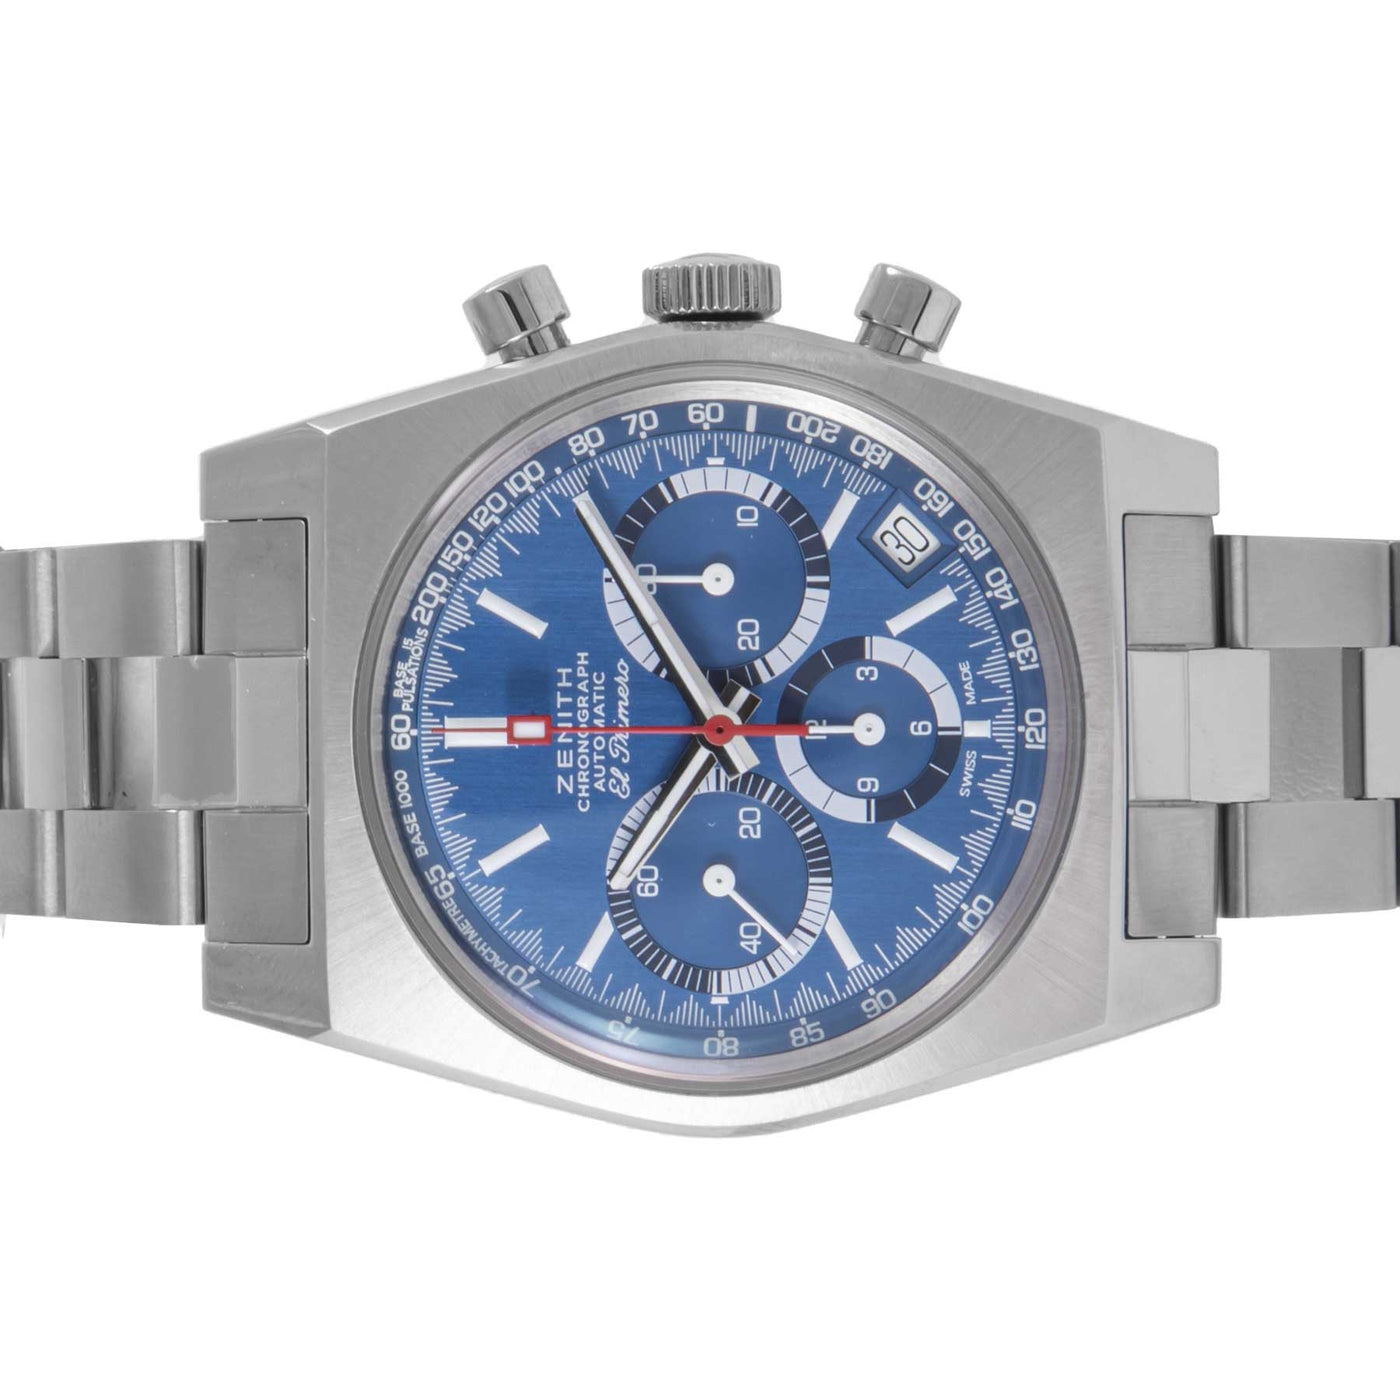 Zenith El Primero A3818 Revival Airweight The Cover Girl| Timepiece360